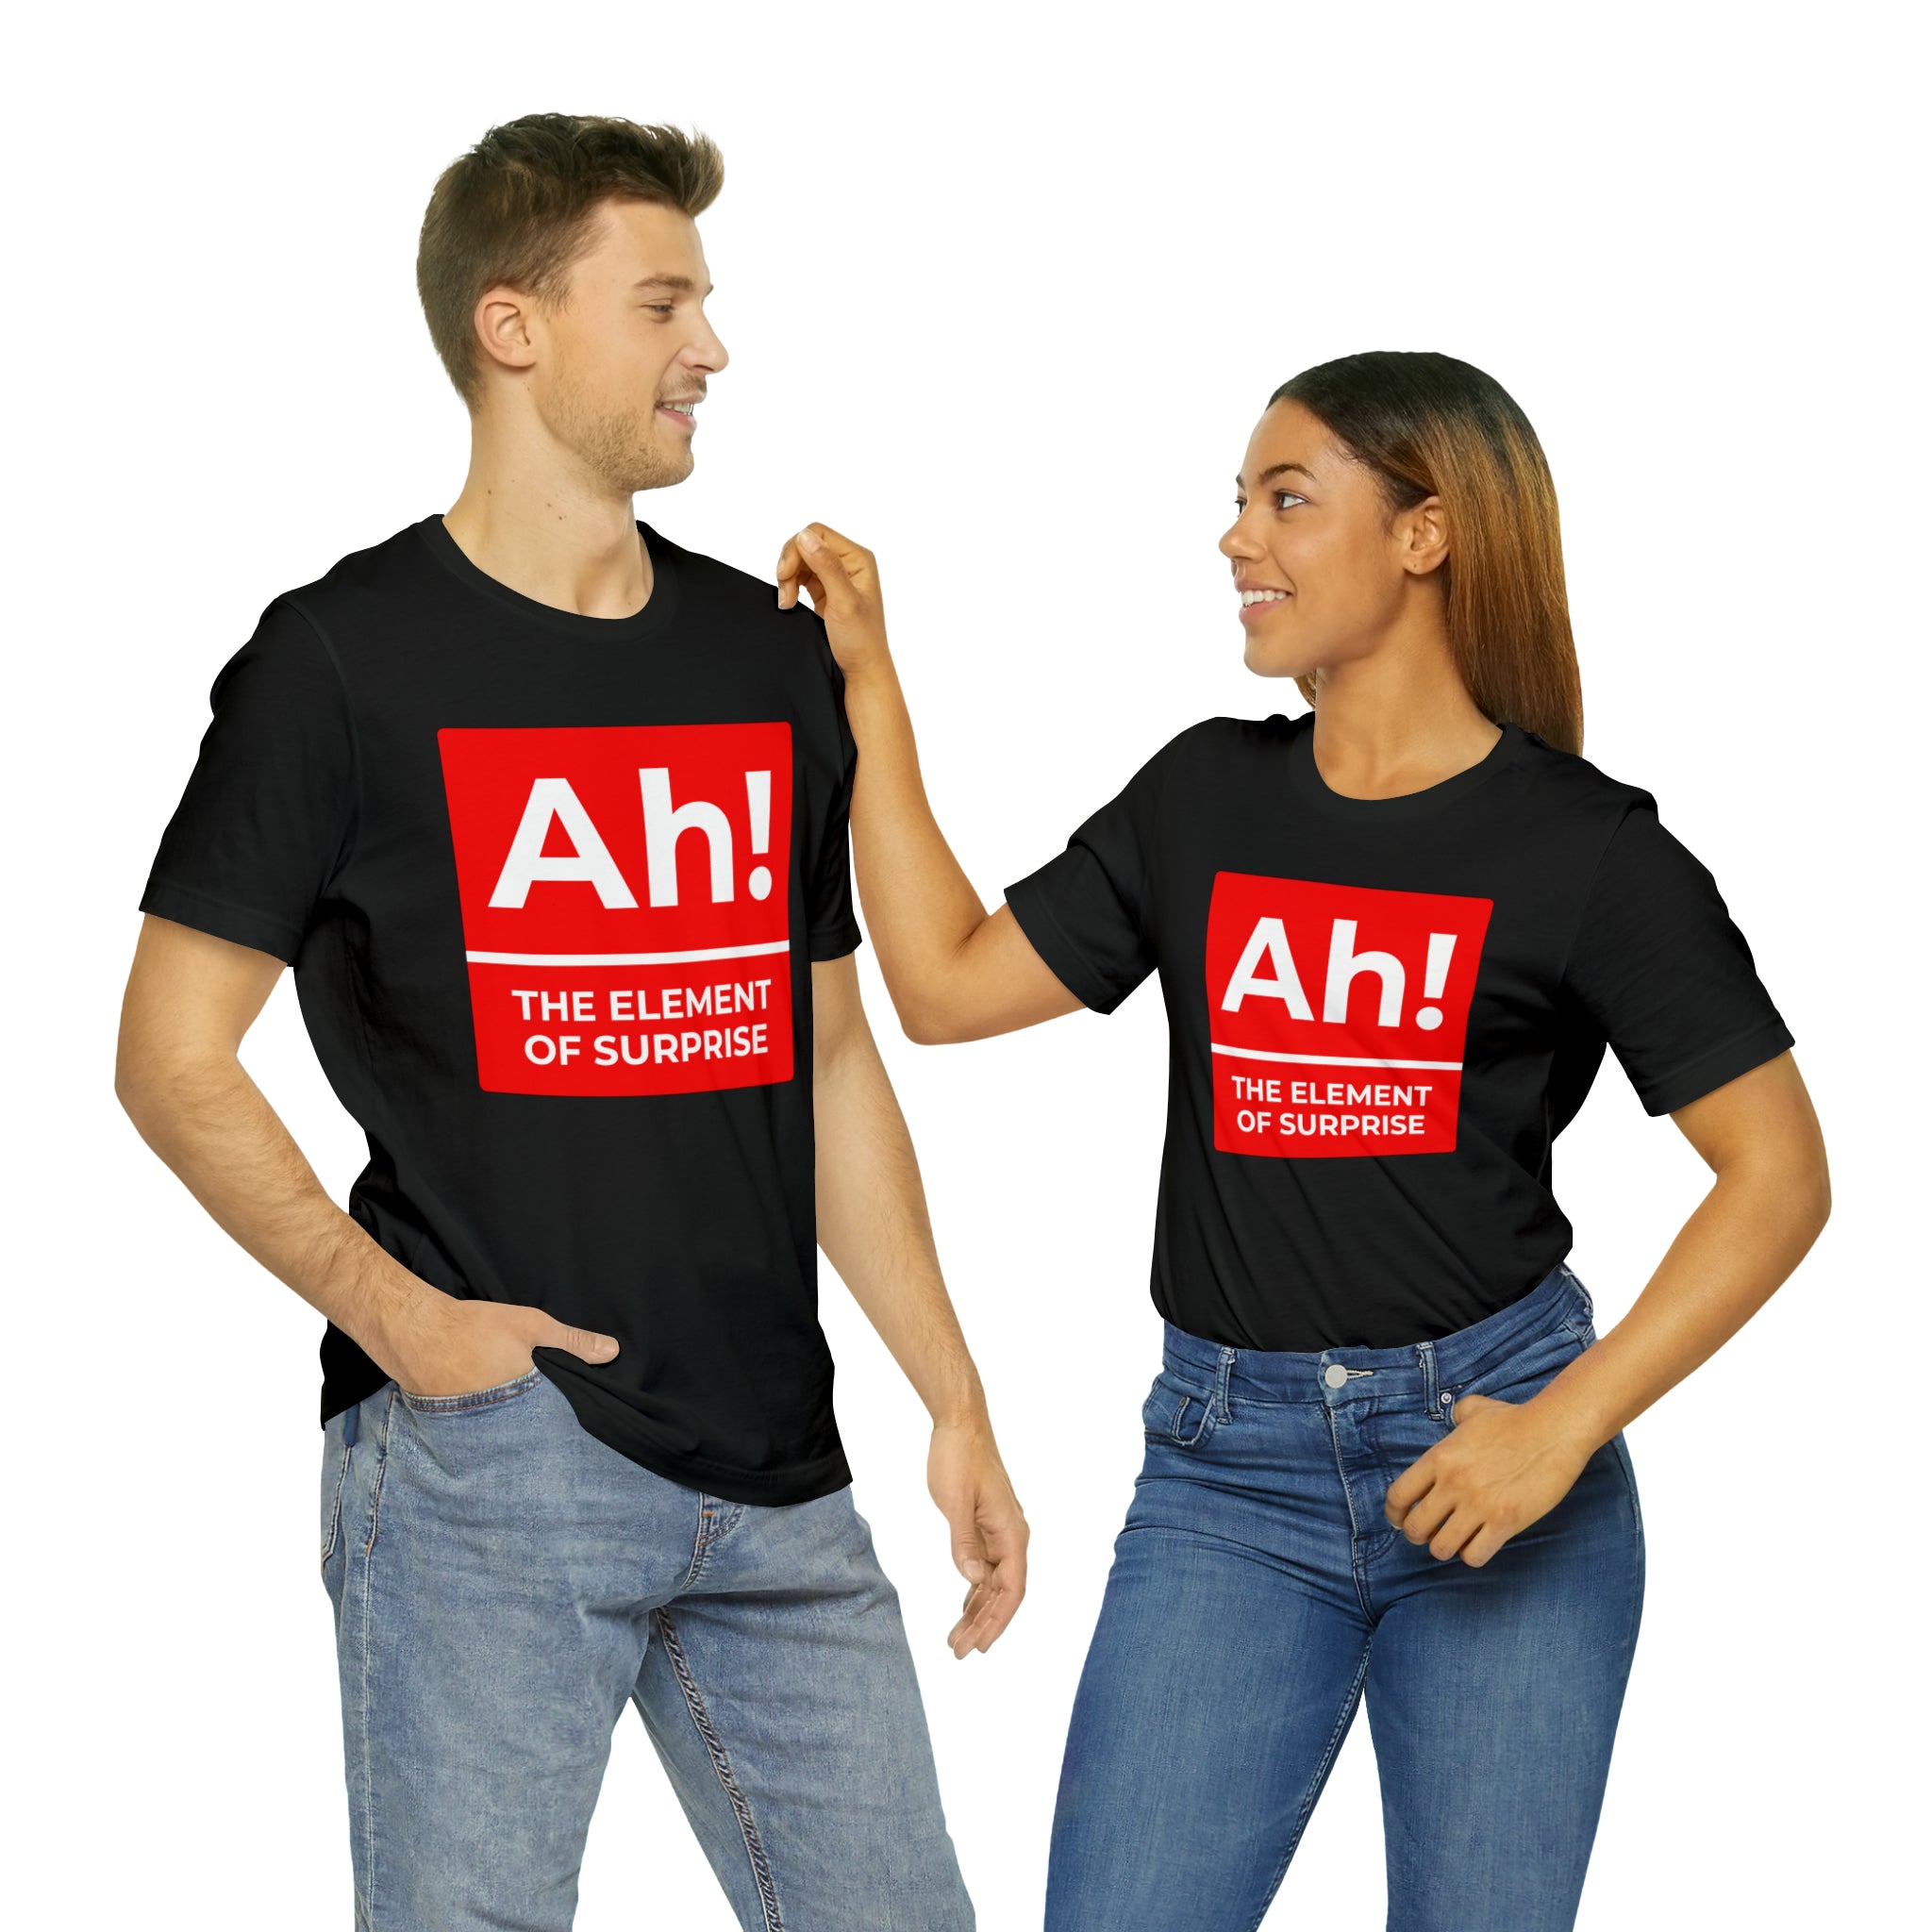 A man and woman standing next to each other wearing an Ah! the Element of Surprise T-shirt, showcasing their chemistry.